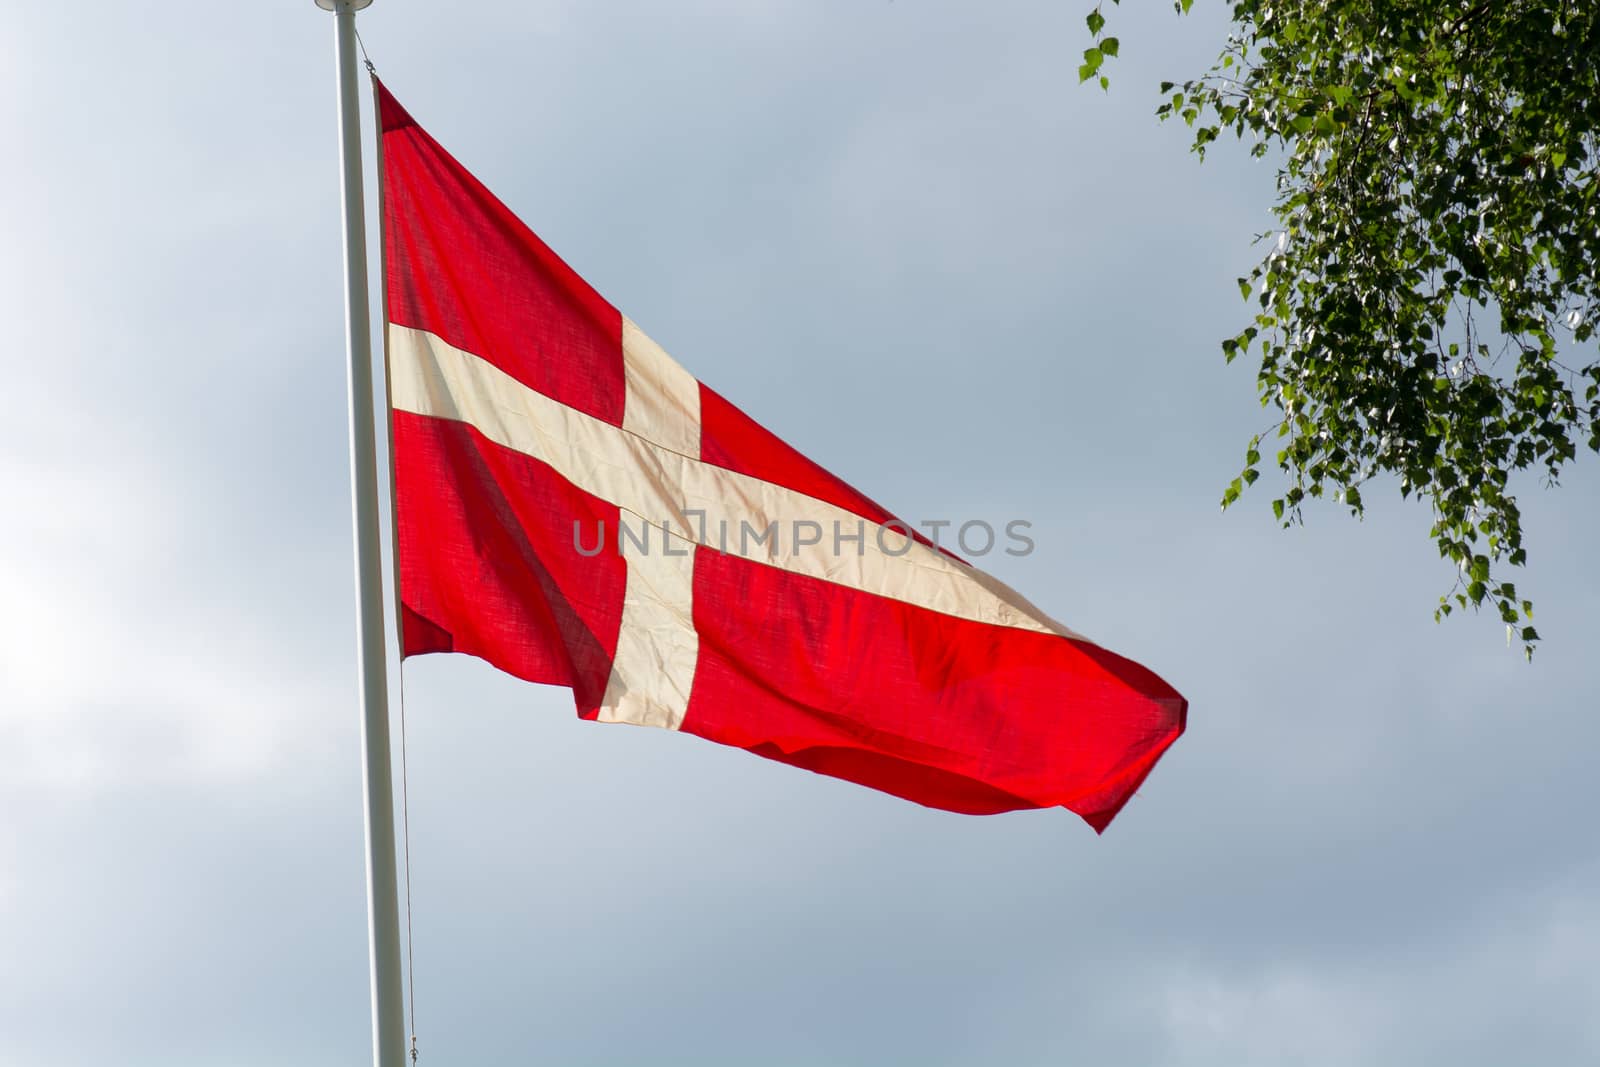 Danish flag on a flag pole in summer with gray clouds in the background